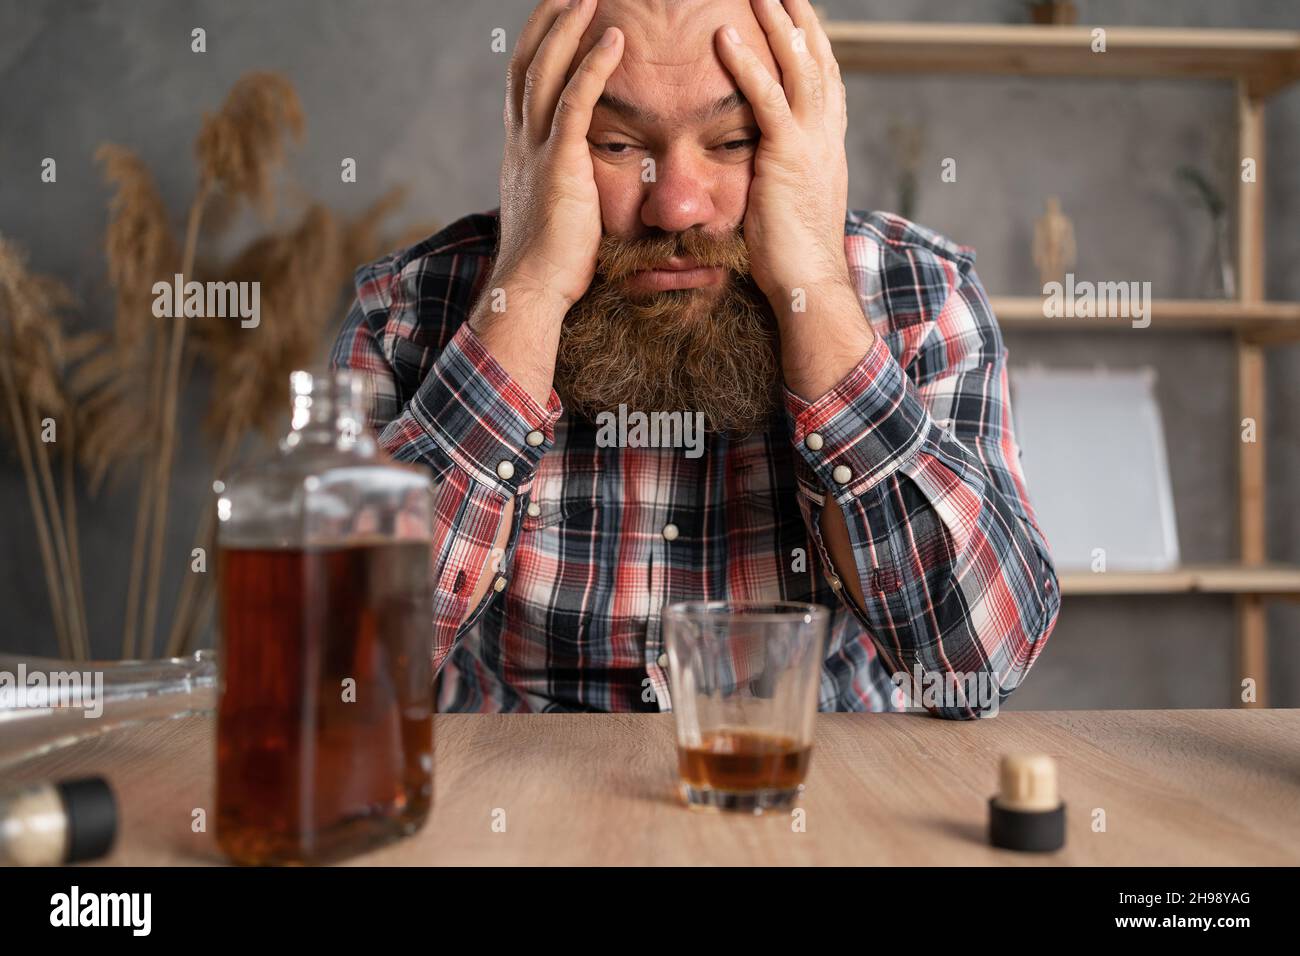 Alcoholism concept. The young man drinks too much alcohol. Sits at home at the table in casual clothes, bowed his head over bottles of cognac and Stock Photo